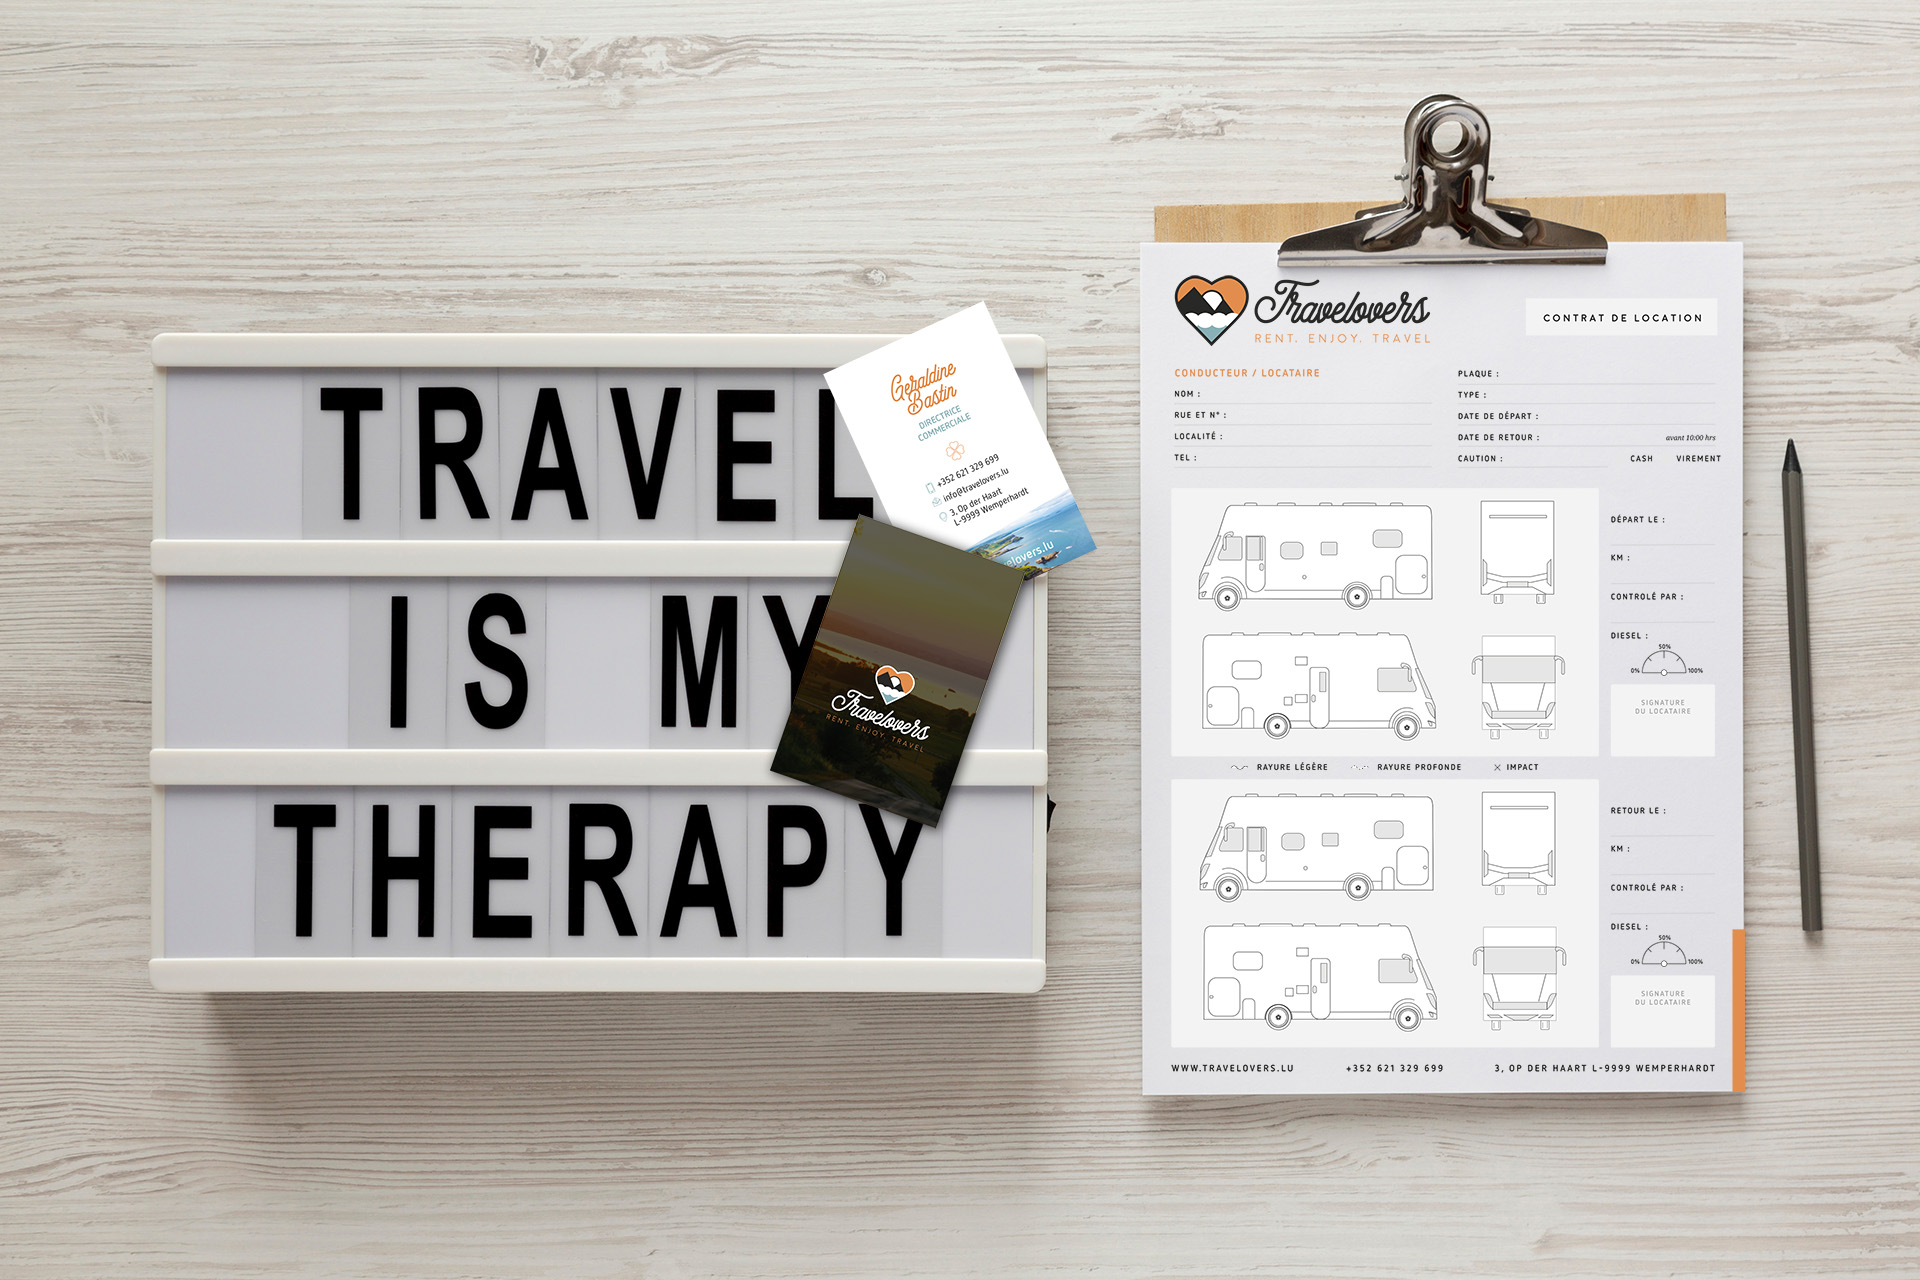 ‘travel,Is,My,Therapy’,Words,On,A,Lightbox,,Clipboard,With